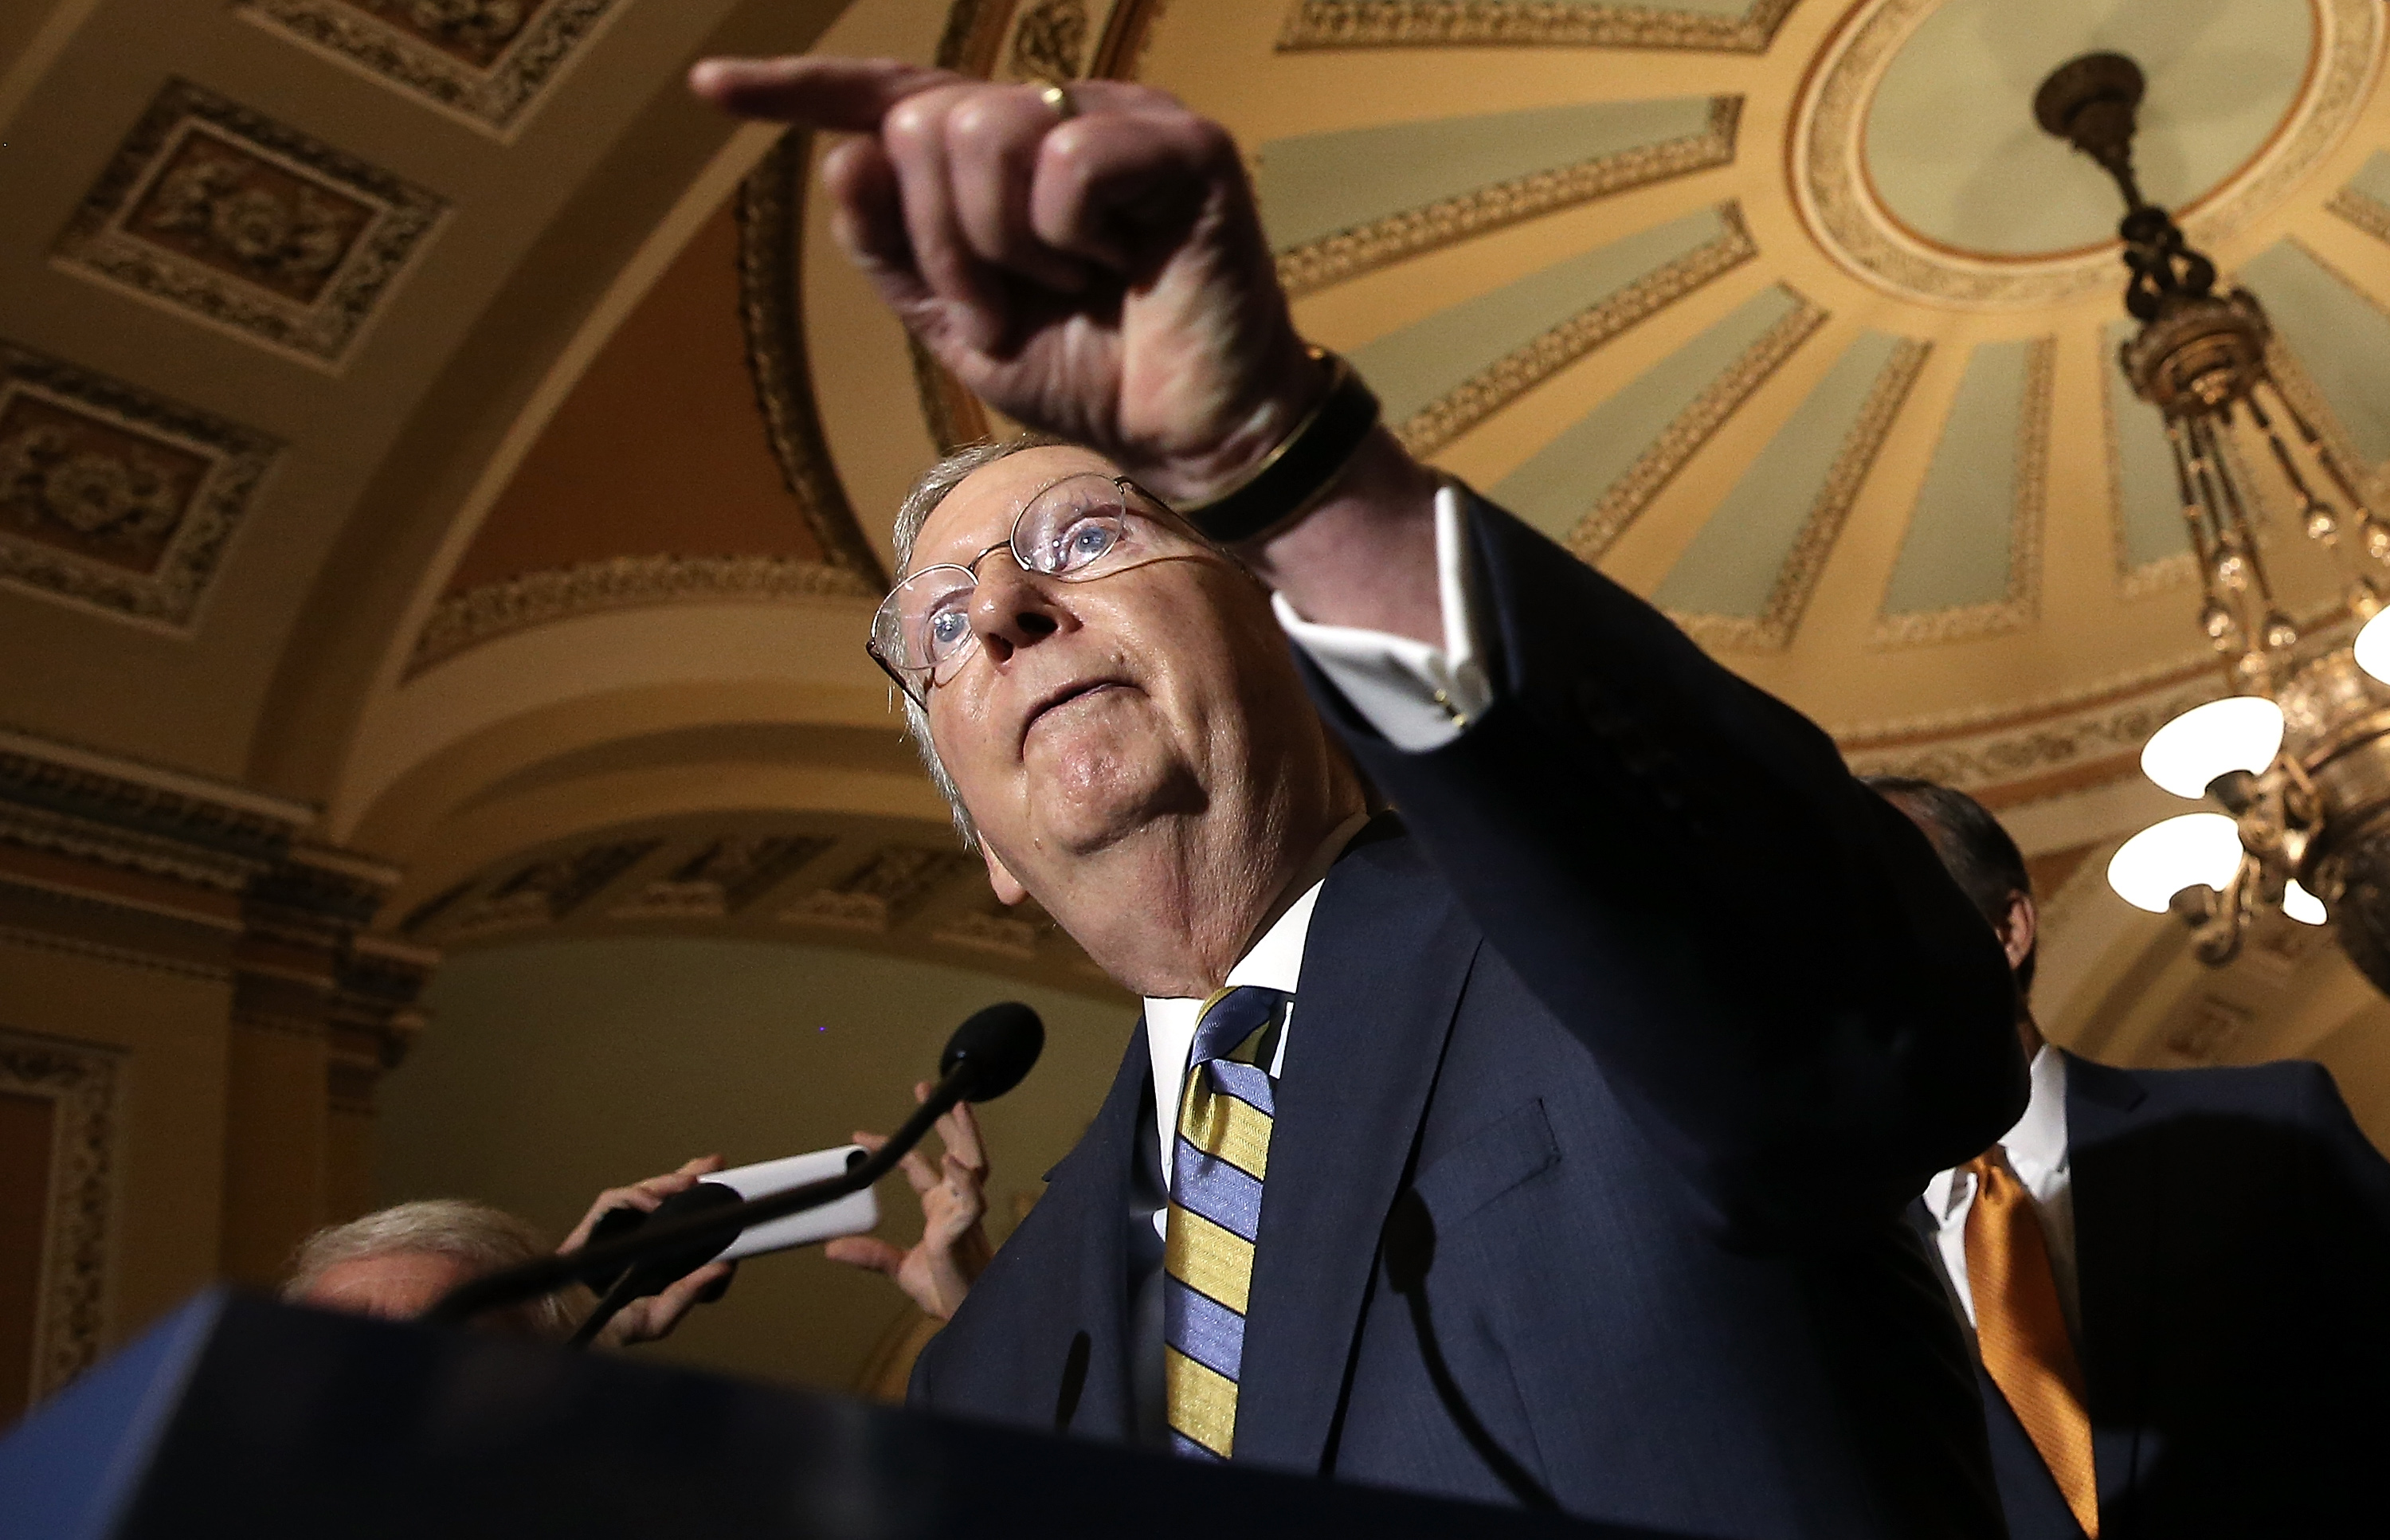 Senate Majority Leader Mitch McConnell (R-KY) answers questions at the U.S. Capitol June 2, 2015 in Washington, DC. (Win McNamee/Getty Images)